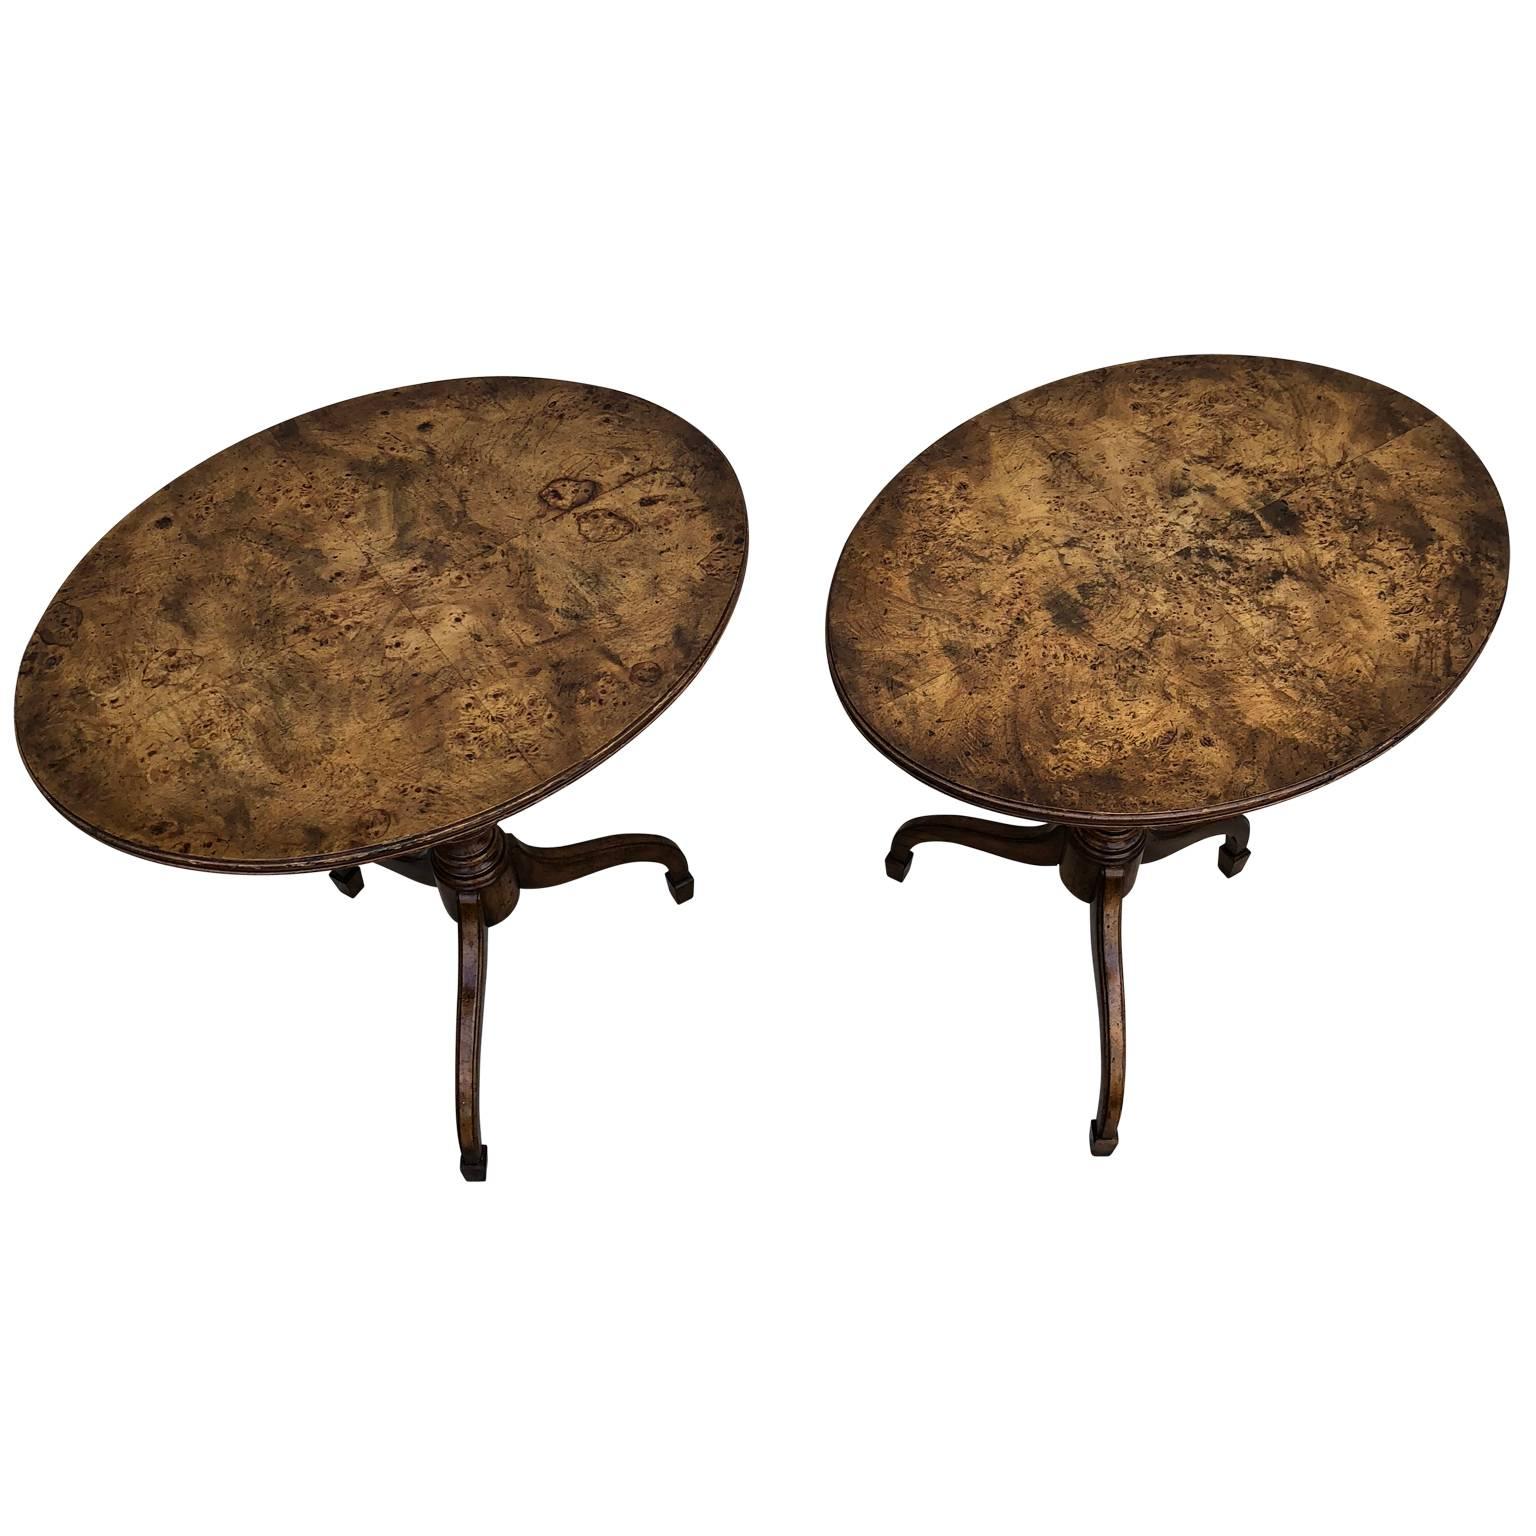 Pair of Mid-Century Modern Burl Wood Lamp or Side Tables by Weiman 6